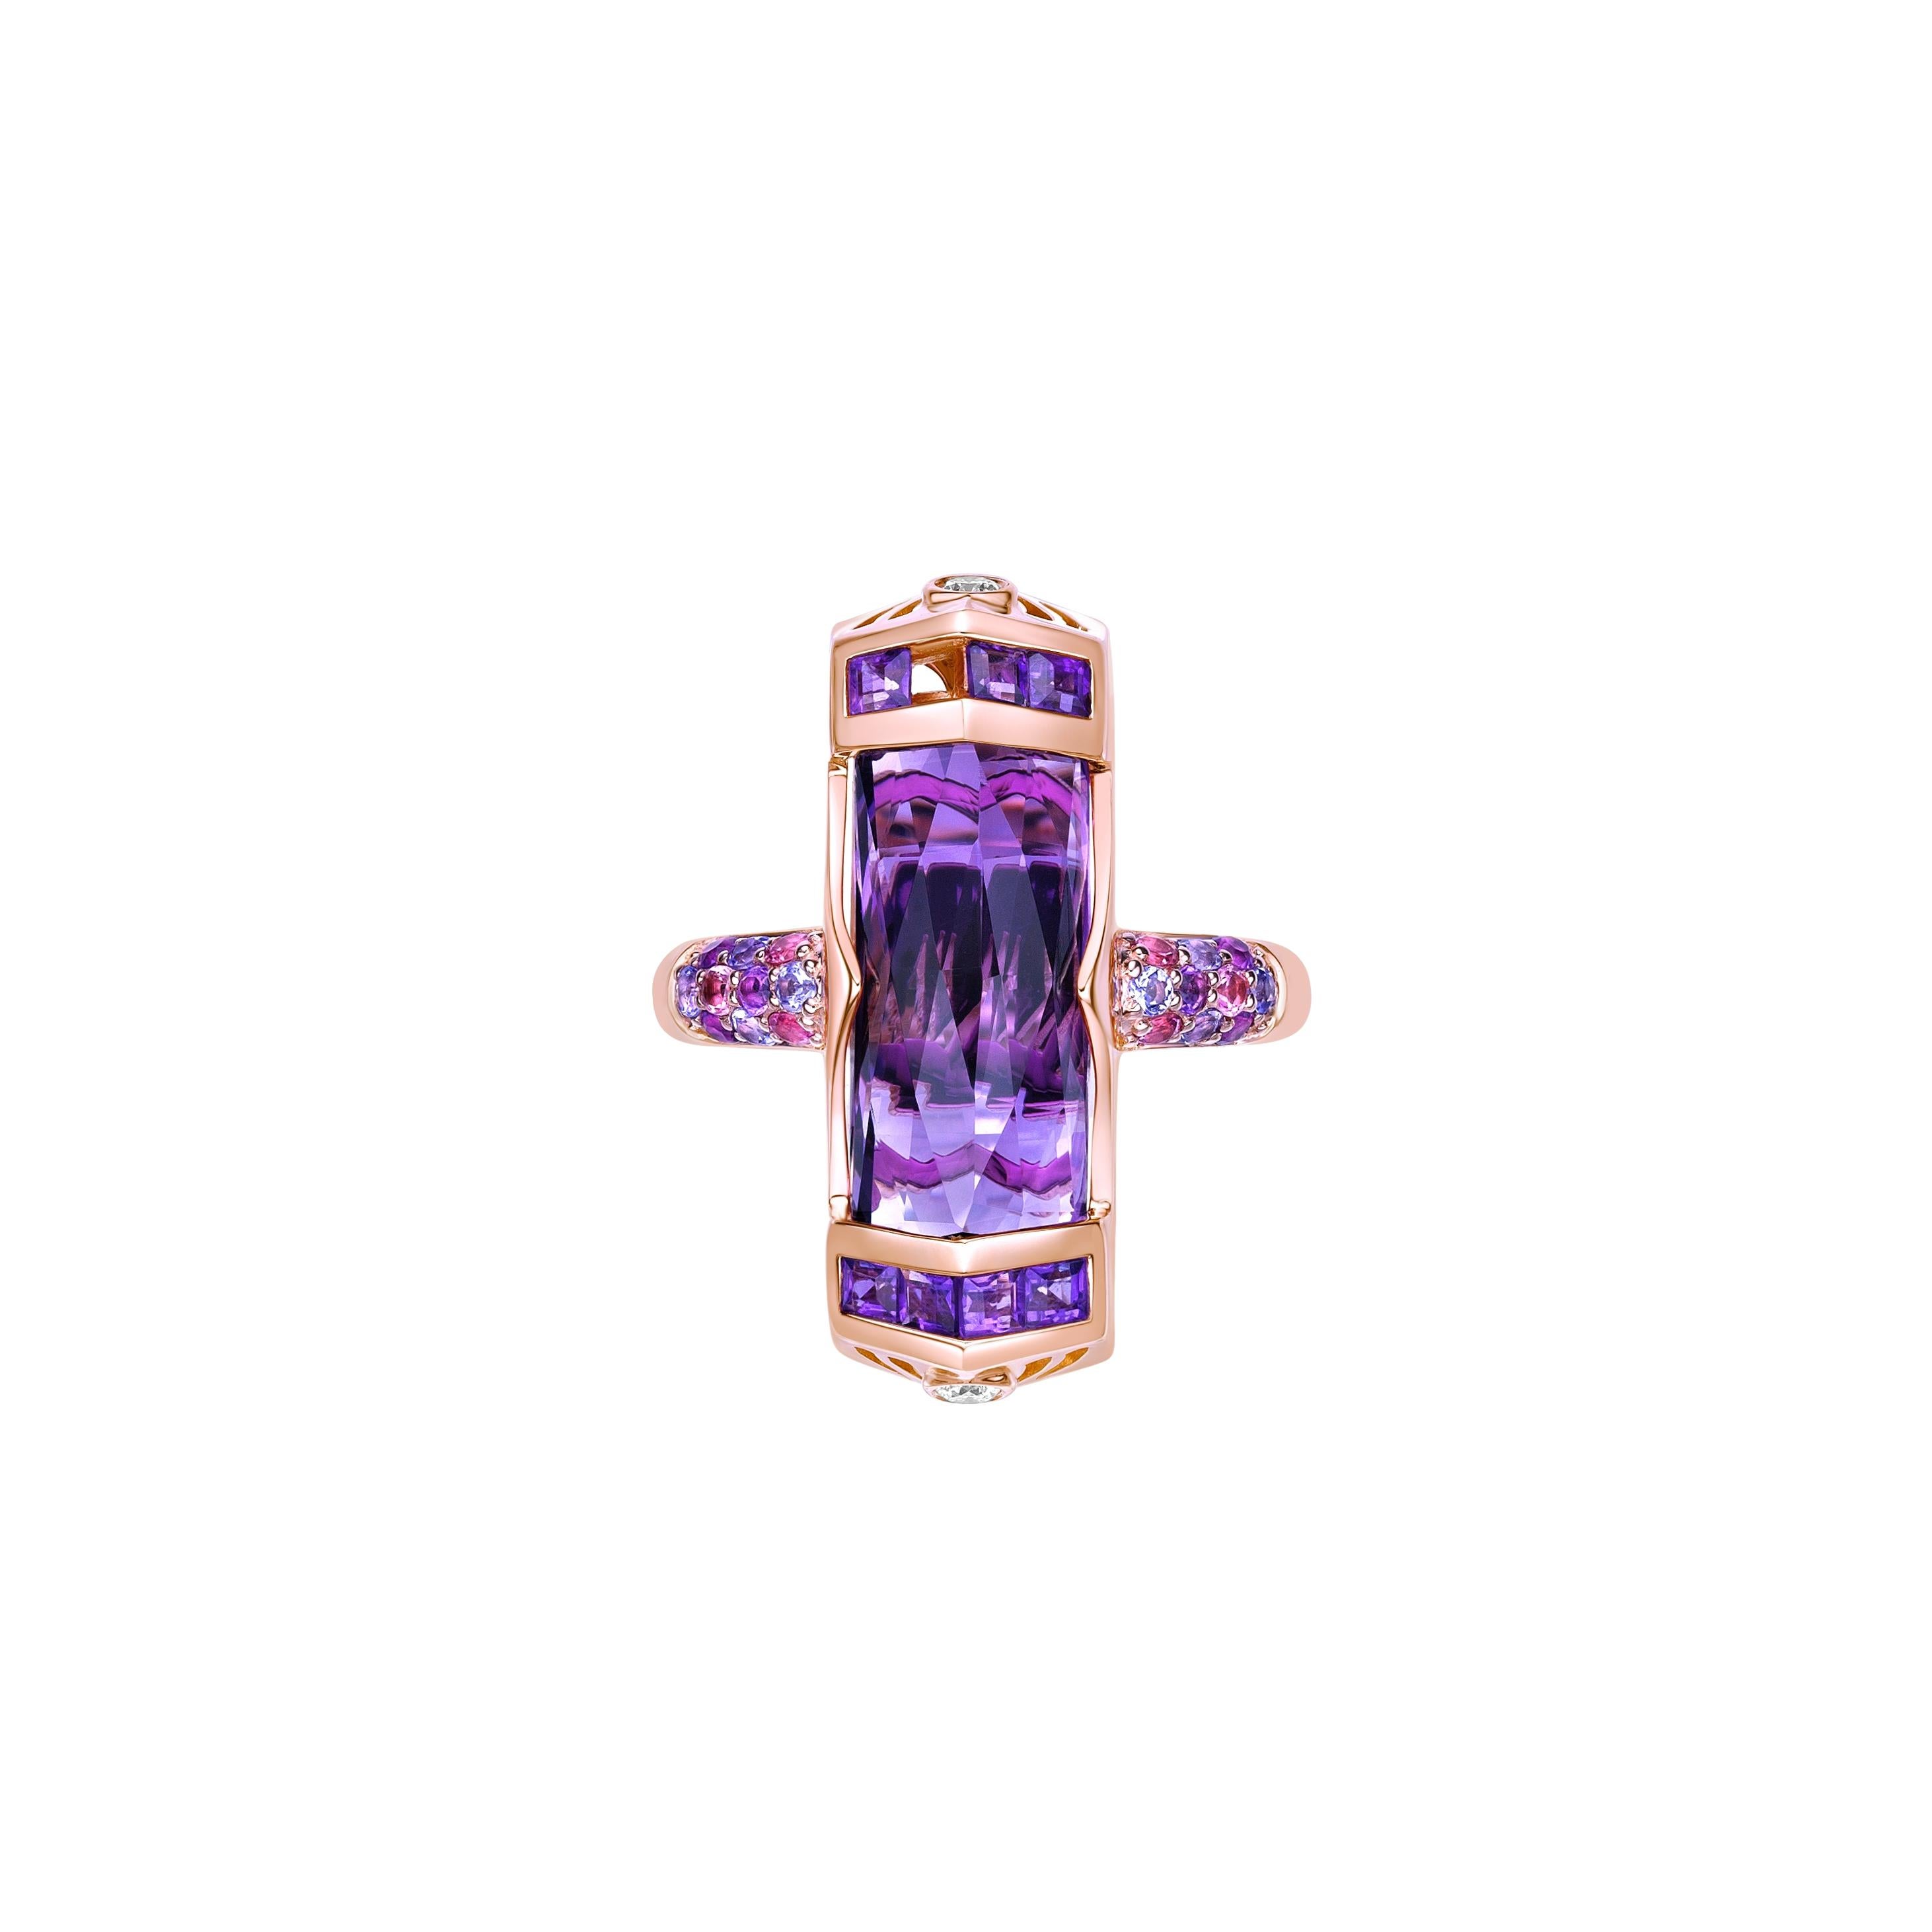 Contemporary 6.58 Carat Amethyst Cocktail Ring in 18KRG with Multi Gemstone and Diamond. For Sale